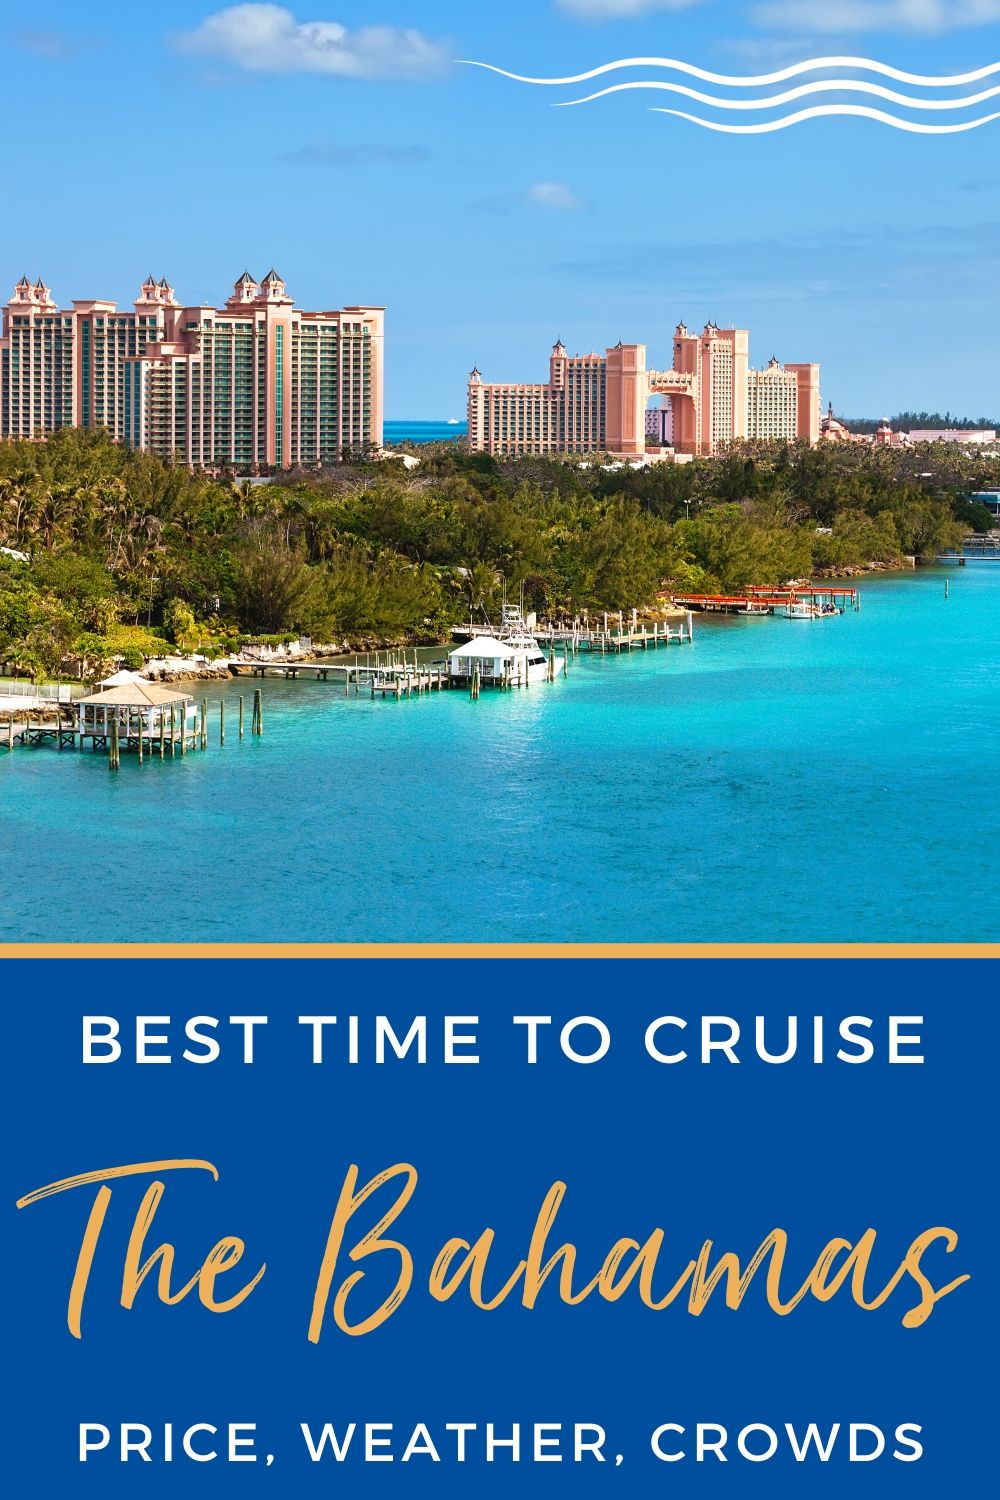 When Is the Best Time to Go to The Bahamas?